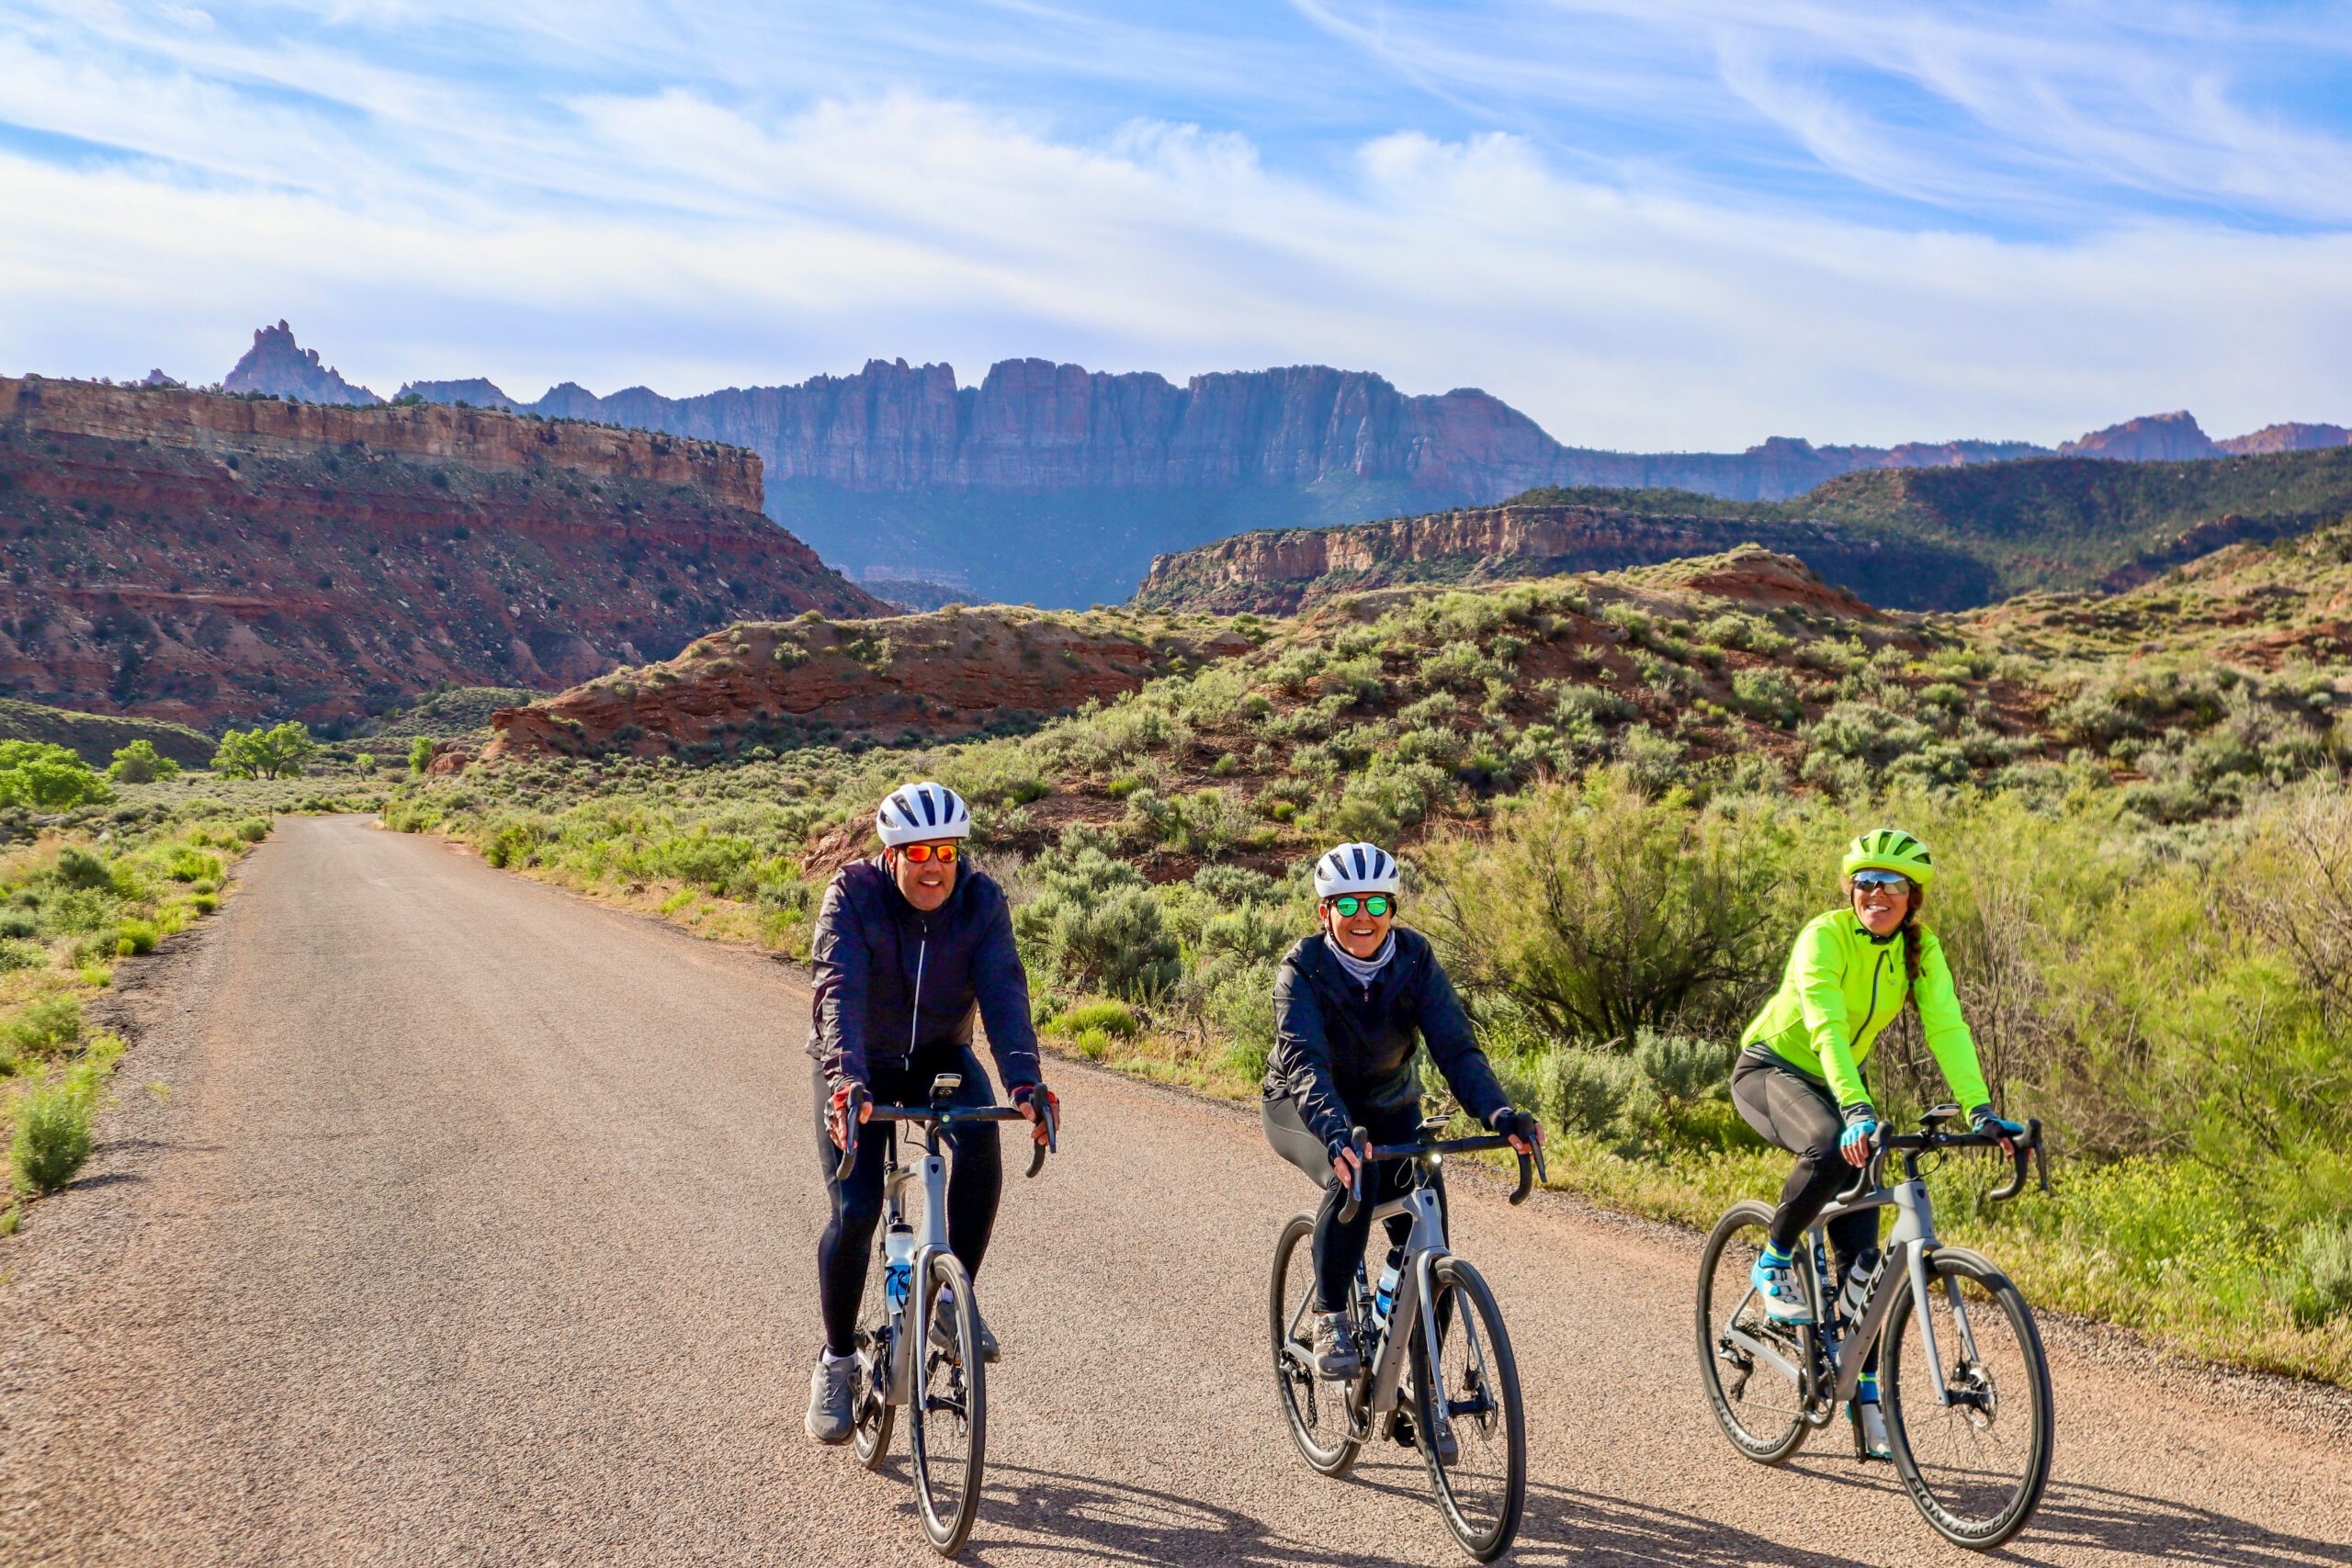 Three cyclists ride on a road with mesa rock formations in the background